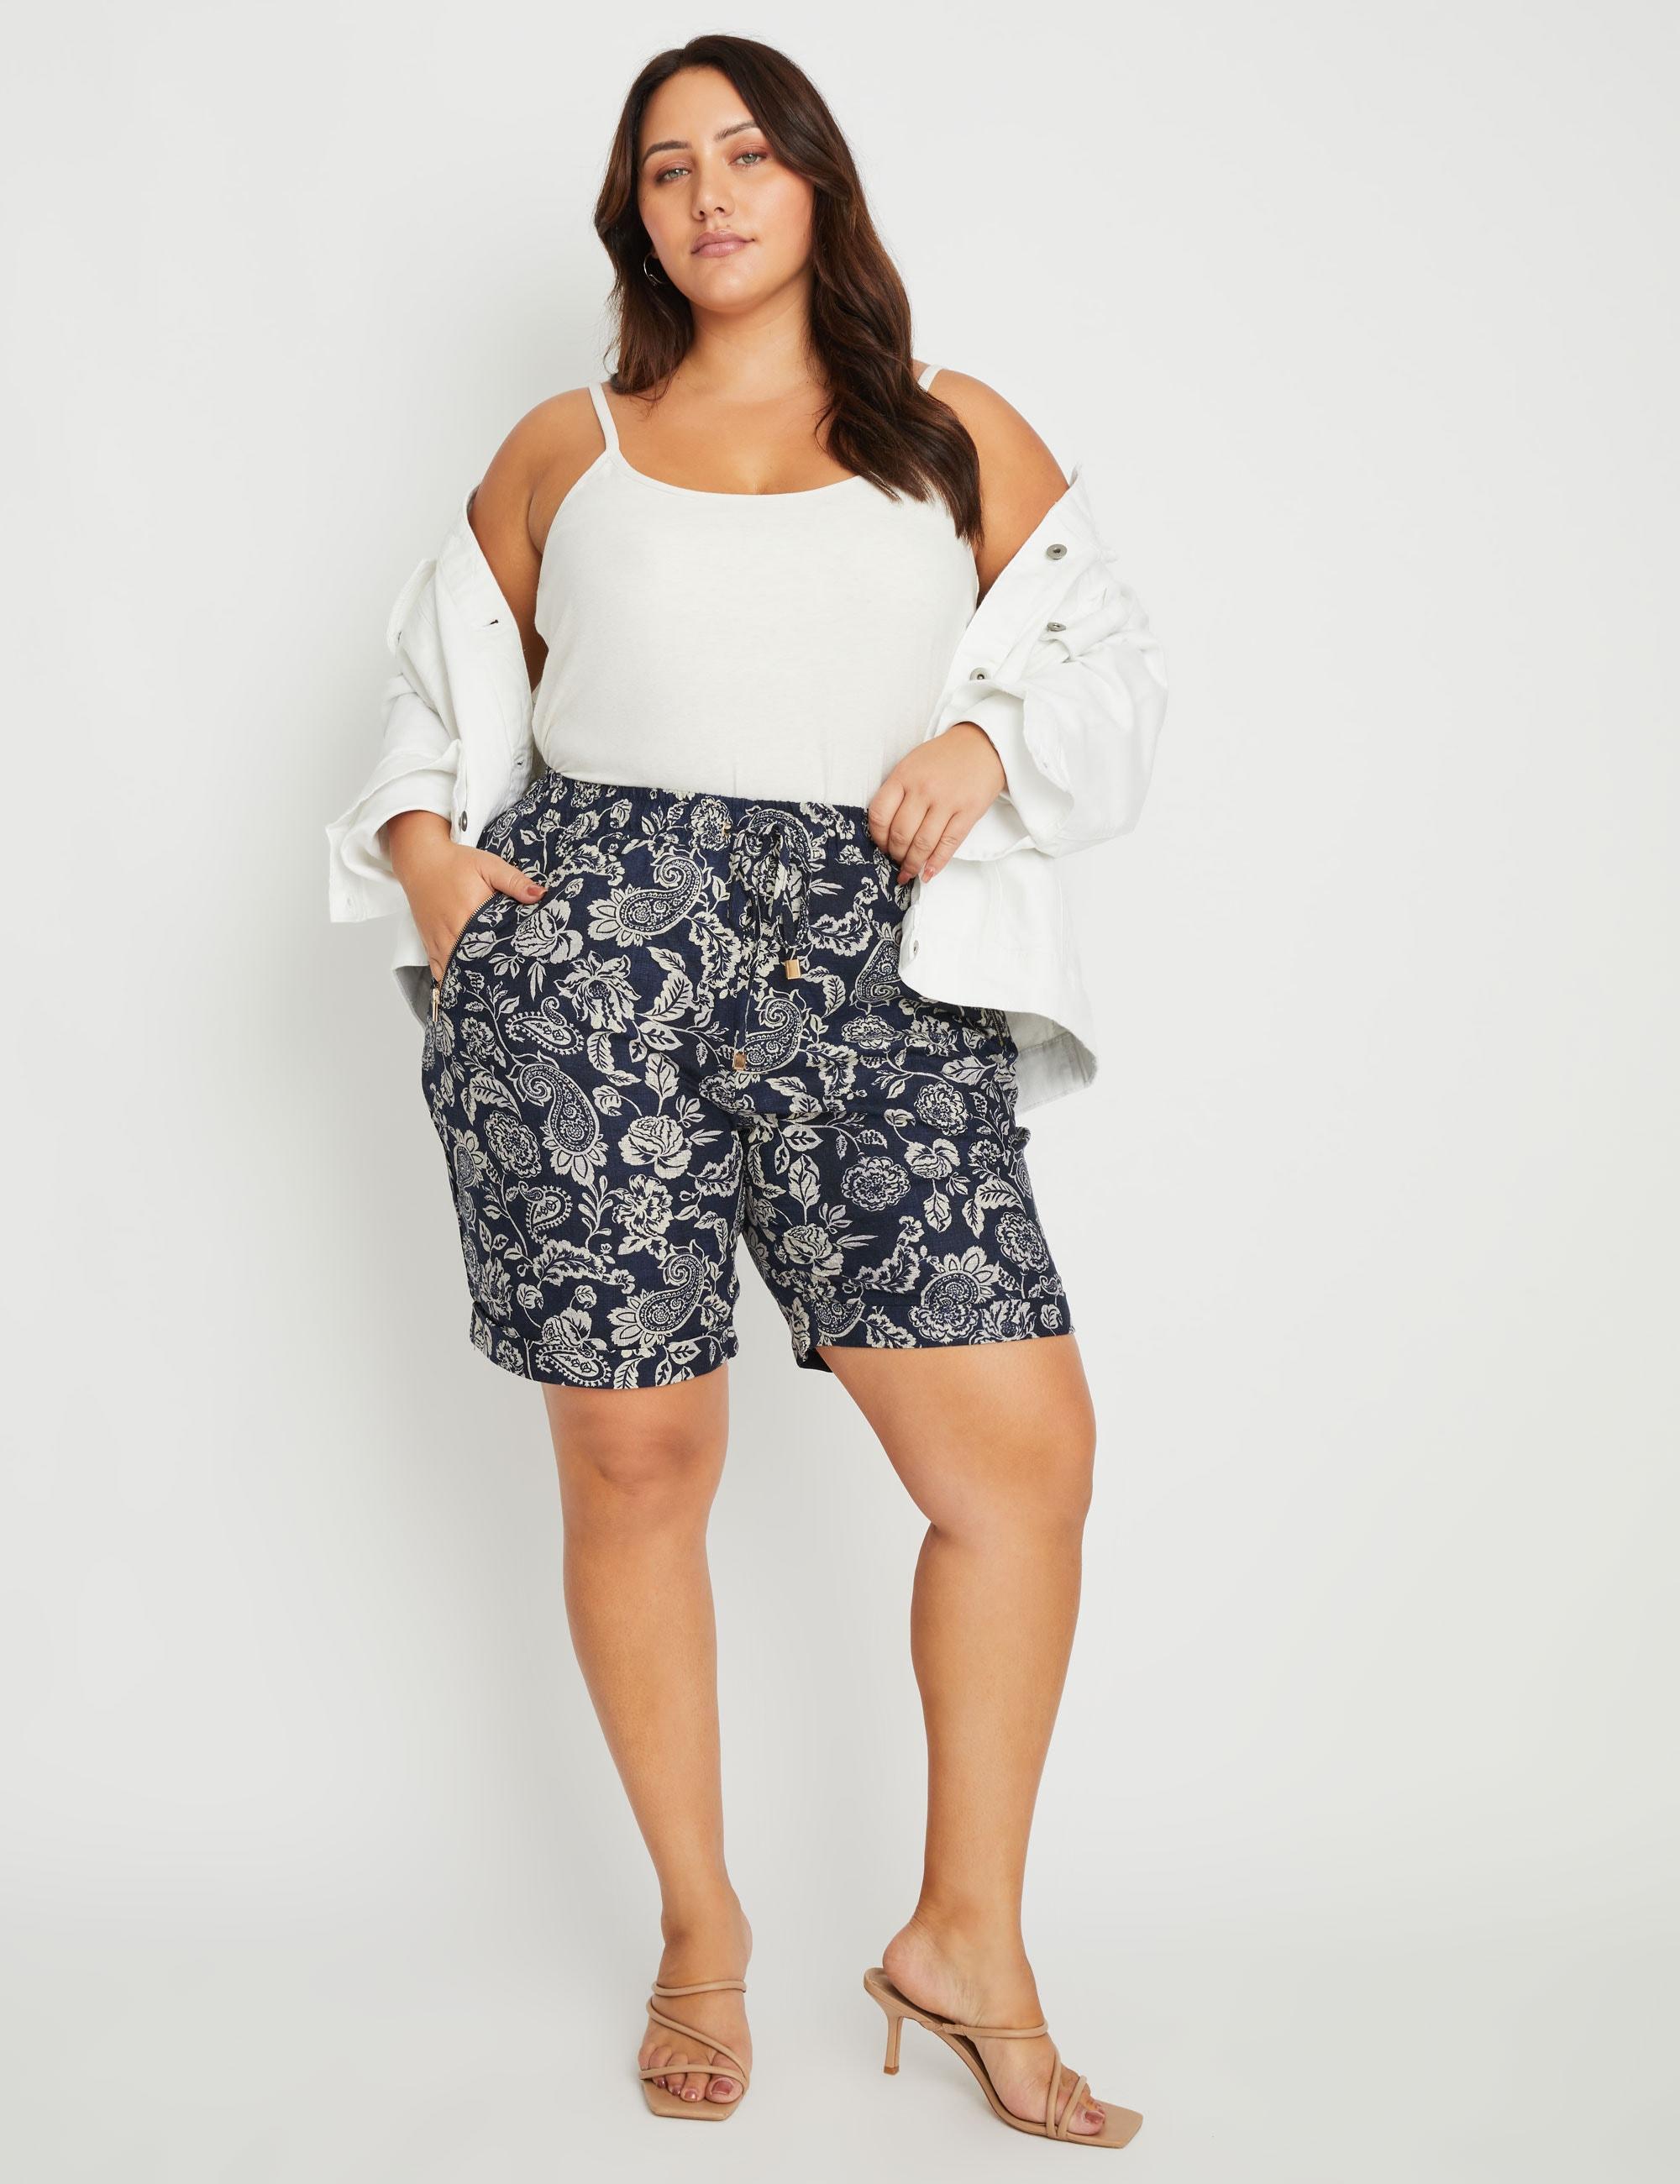 BeMe - Plus Size - Womens Blue Shorts - Summer - Linen - Chino - High Waist - Navy Multi - Paisley - Relaxed Fit - Chino - Zipped Pocket Casual Wear